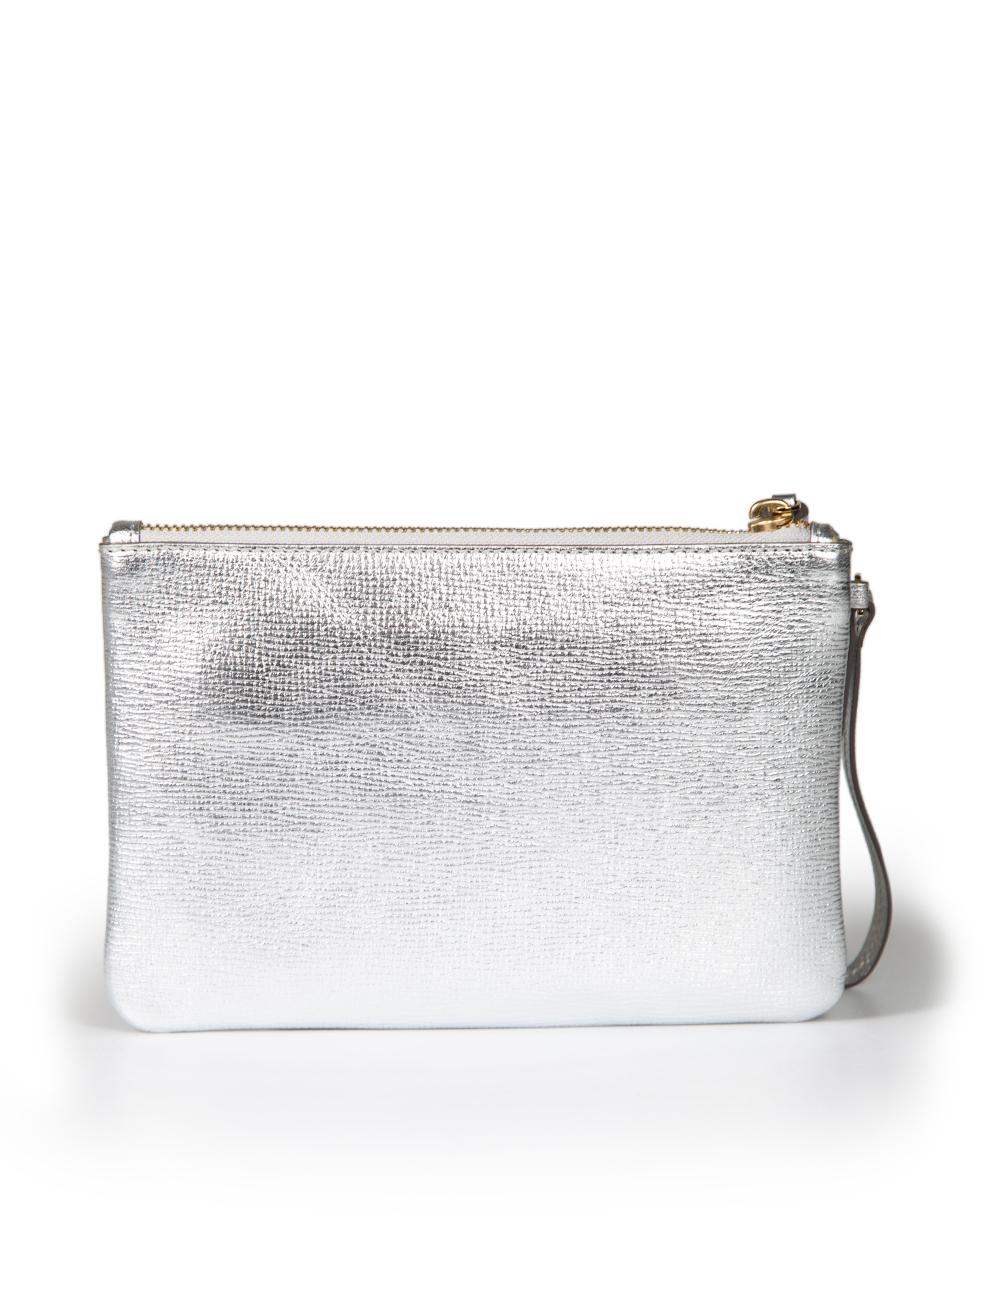 Anya Hindmarch Silver Leather ‚ÄúSmall Appliances‚Äù Clutch In Good Condition For Sale In London, GB